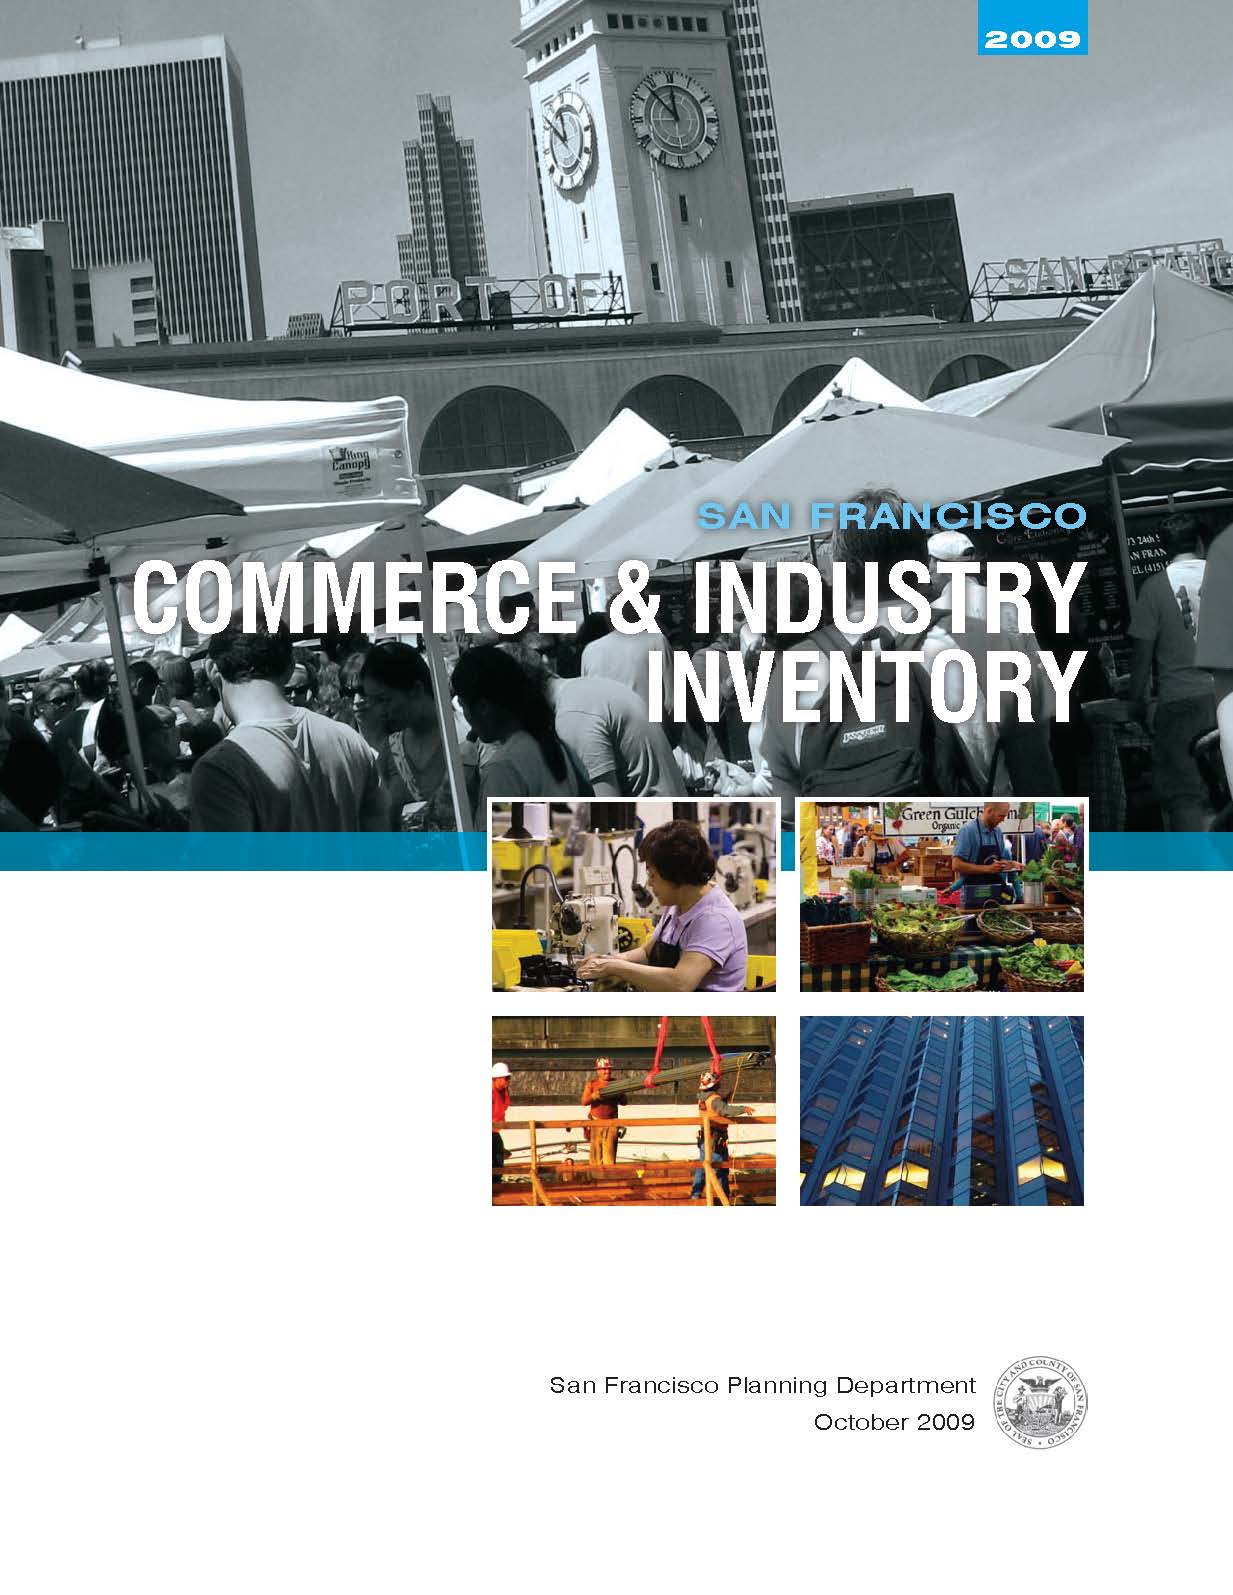 Cover Image for the Commerce & Industry Inventory Report 2009